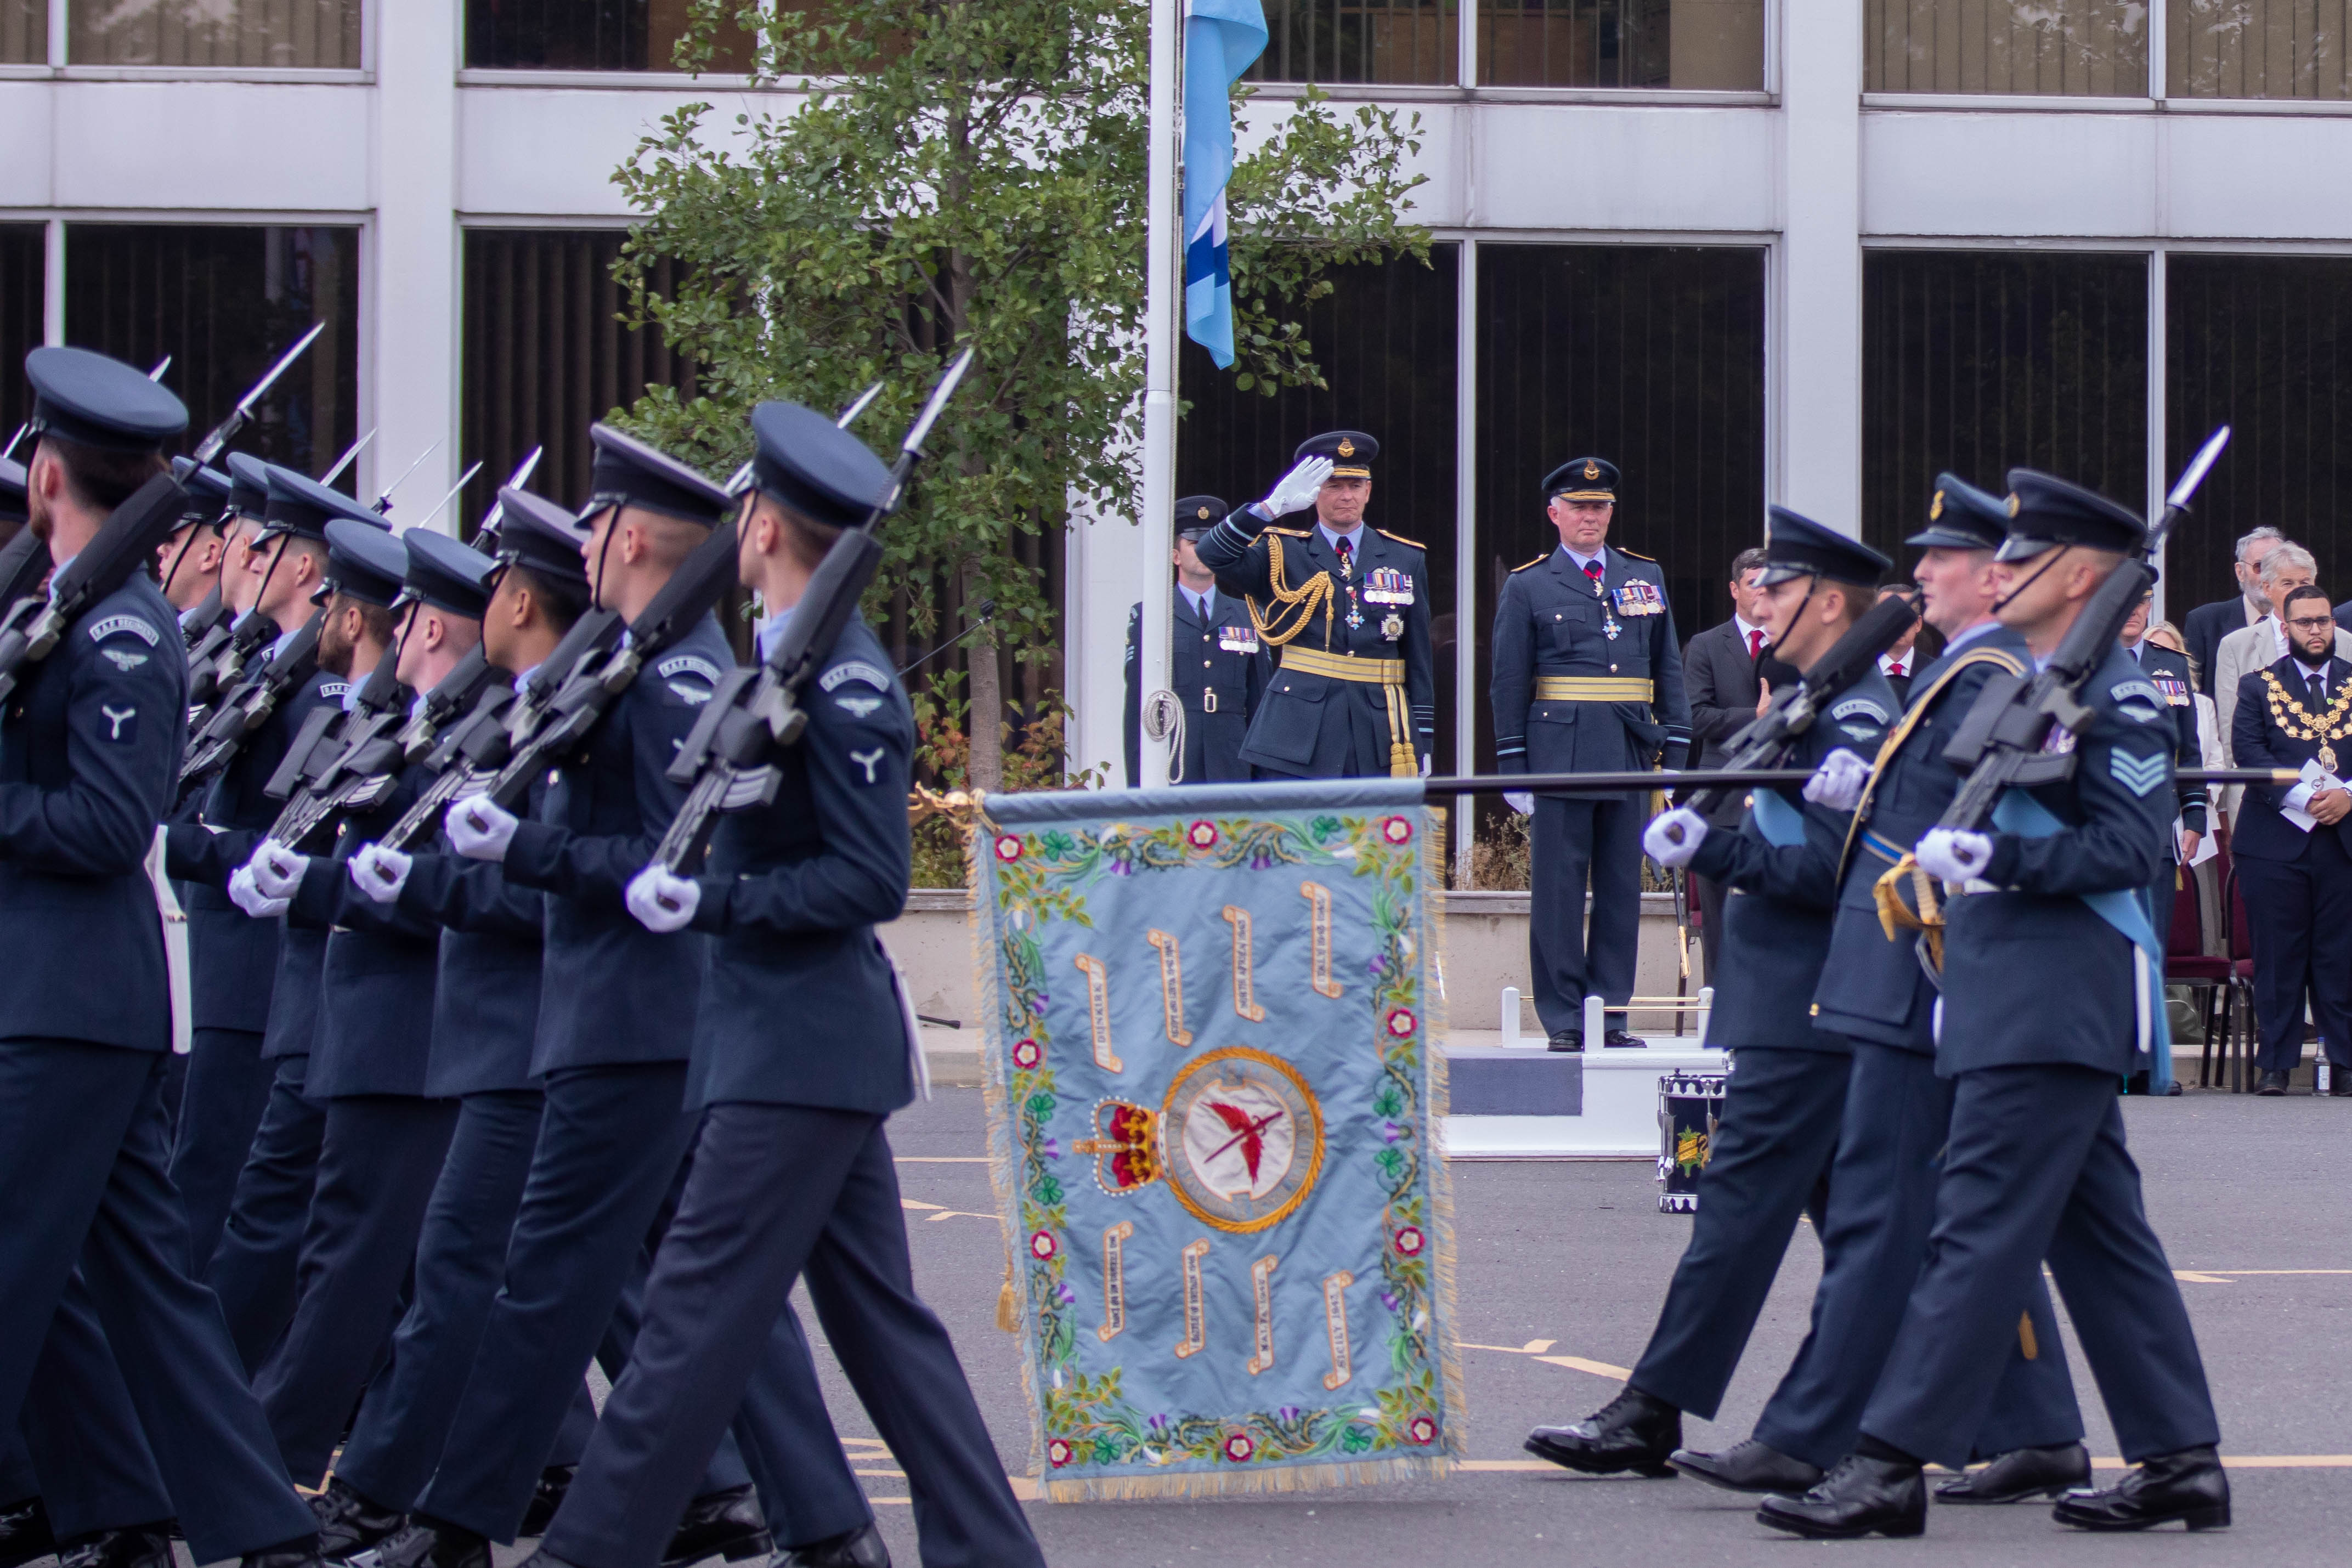 Image shows Squadron parading with rifles and carrying standard, as Chief of the Air Staff salutes behind.